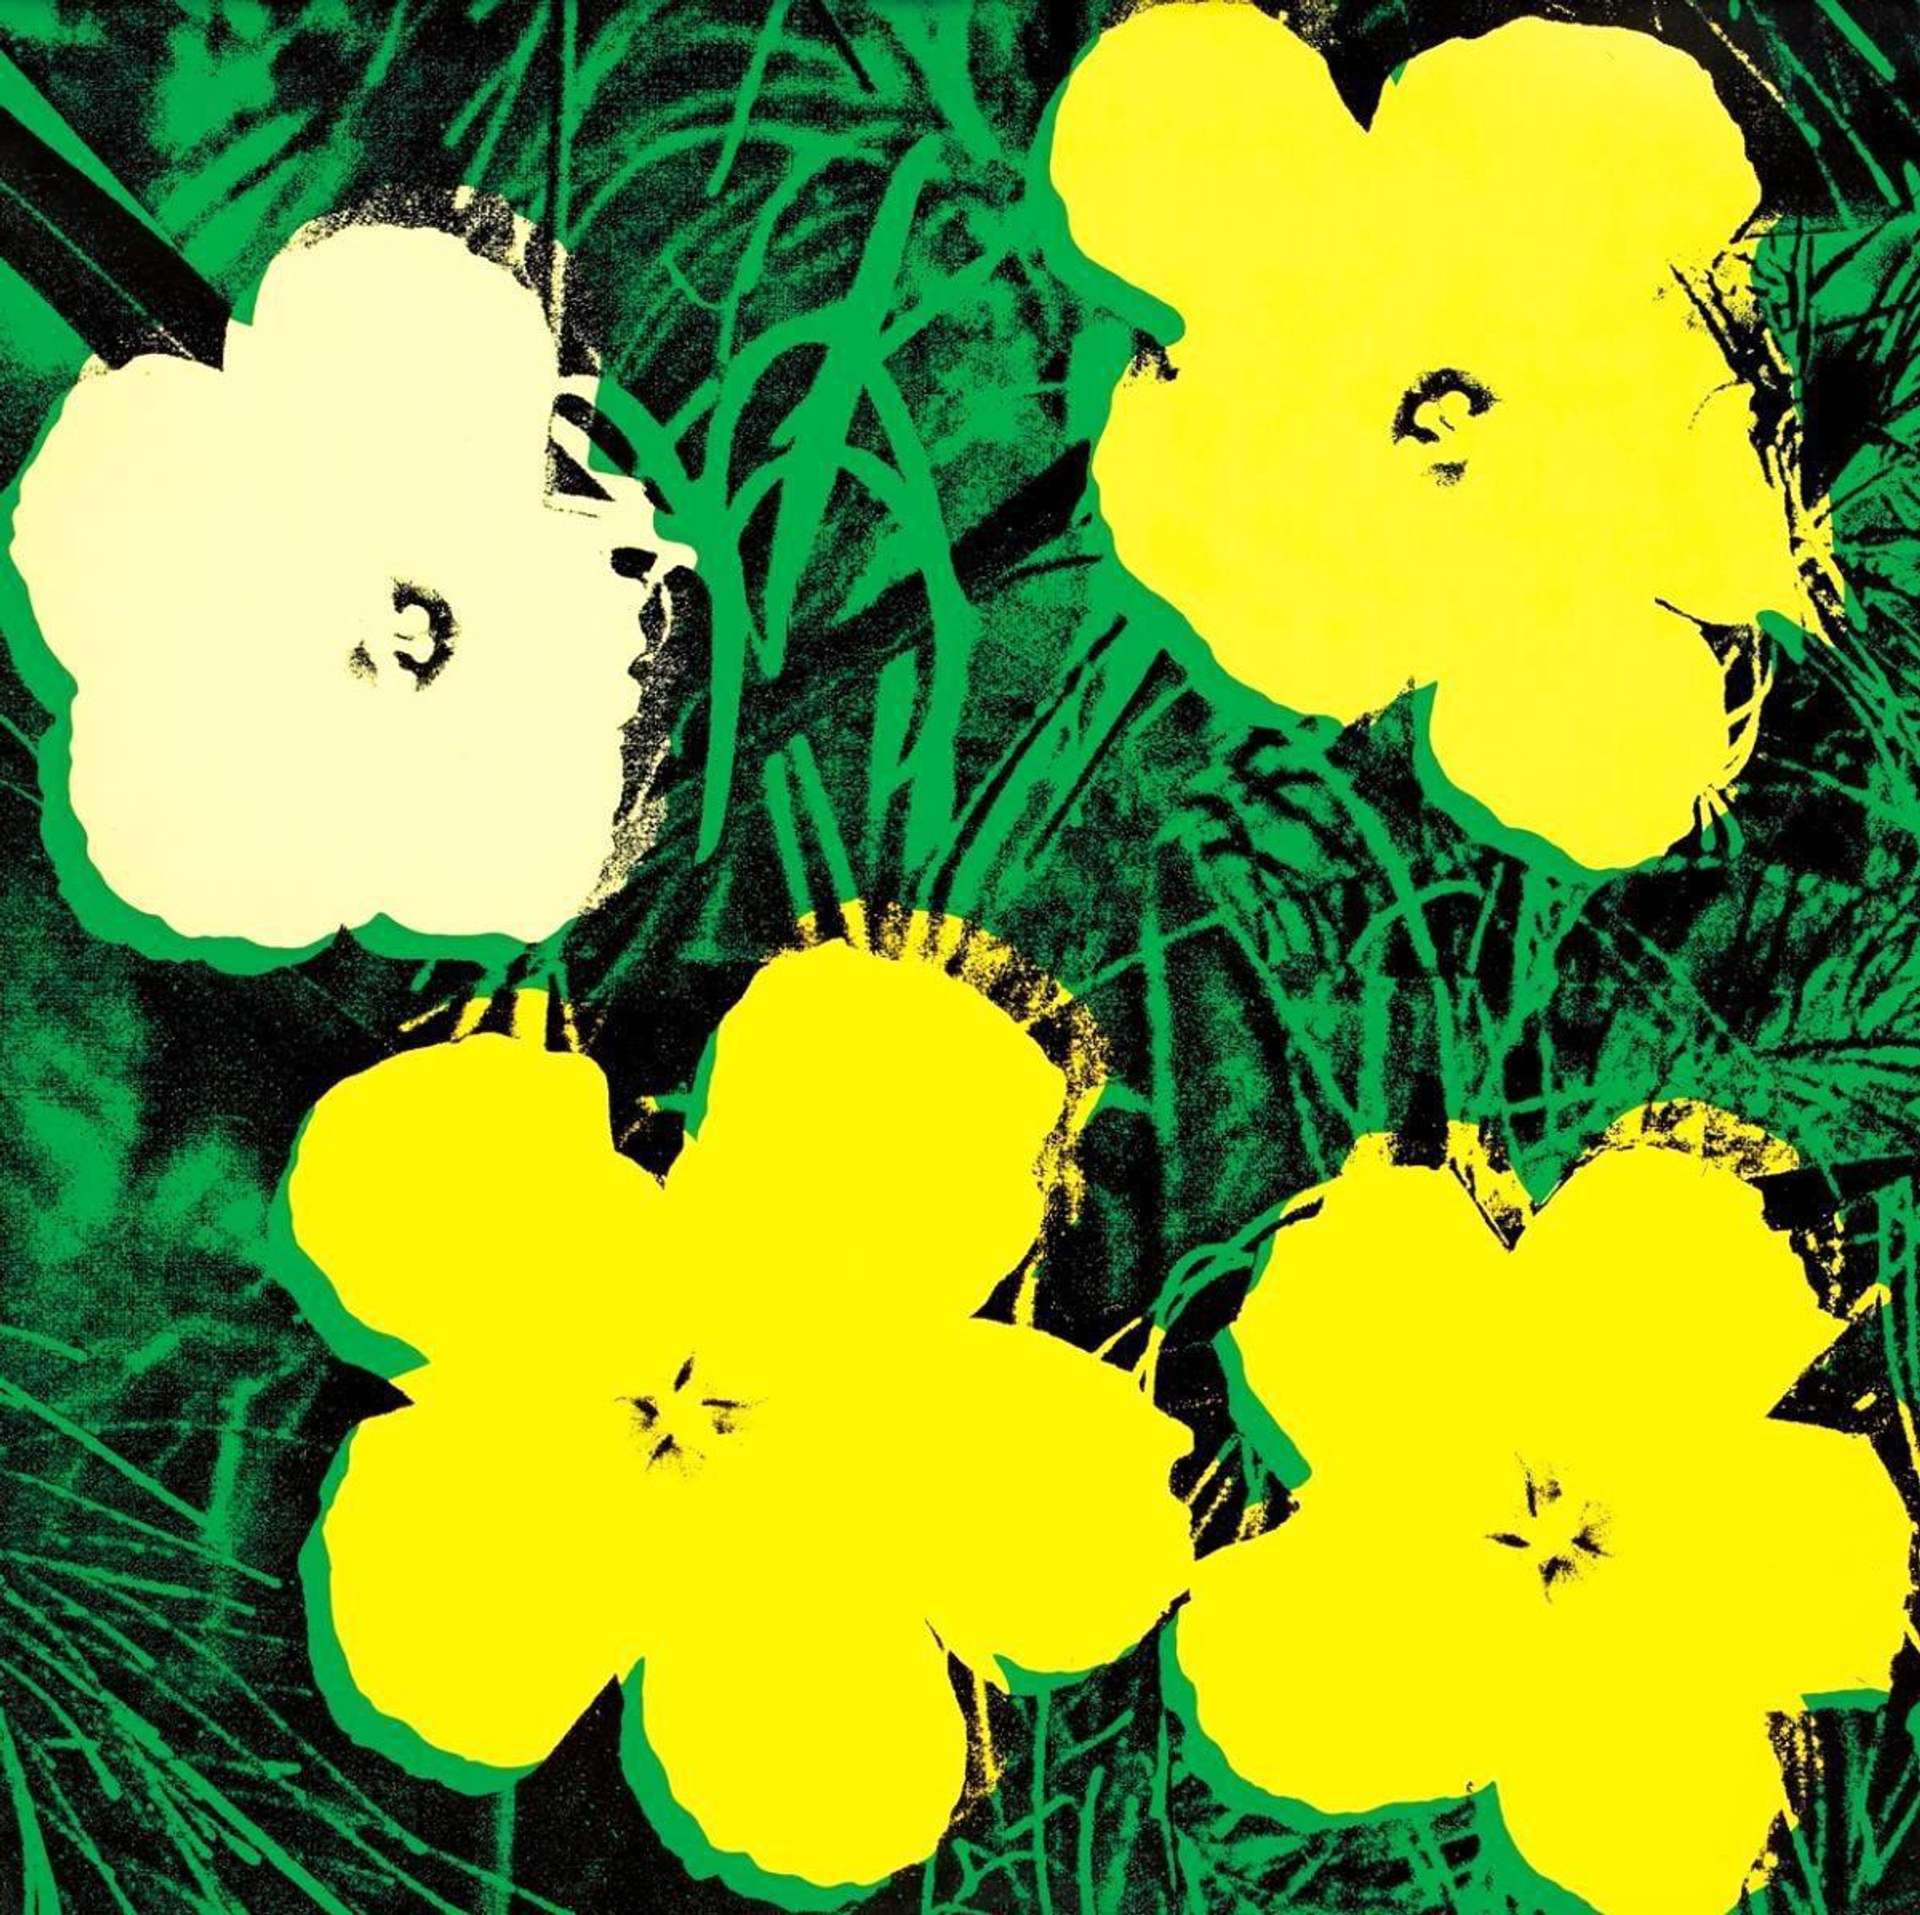 Flowers (F & S 11.72) by Andy Warhol